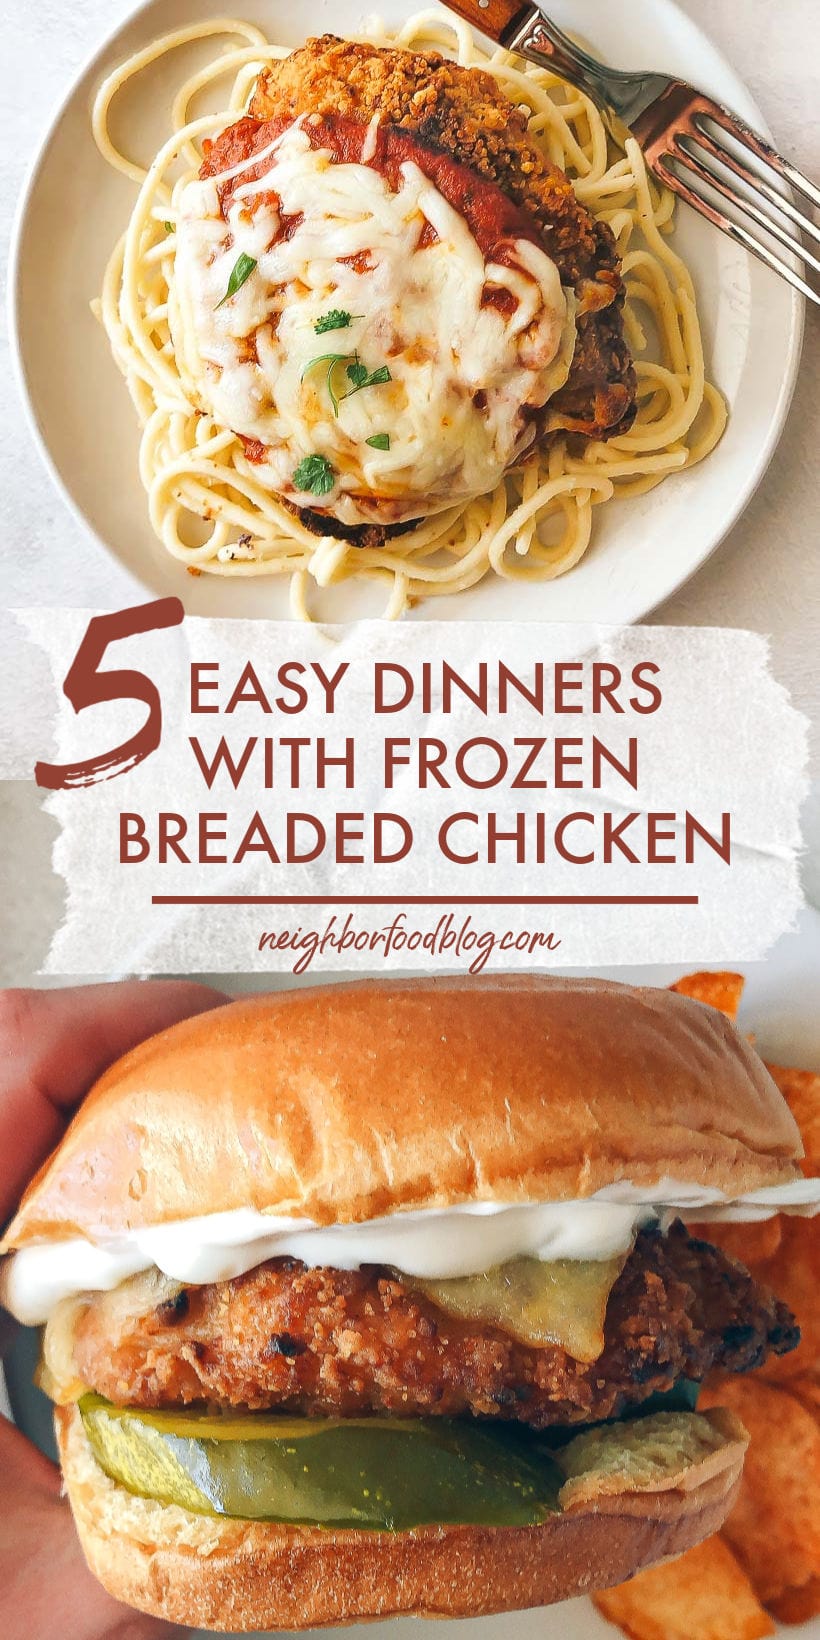 Two different recipes that can be made with frozen breaded chicken